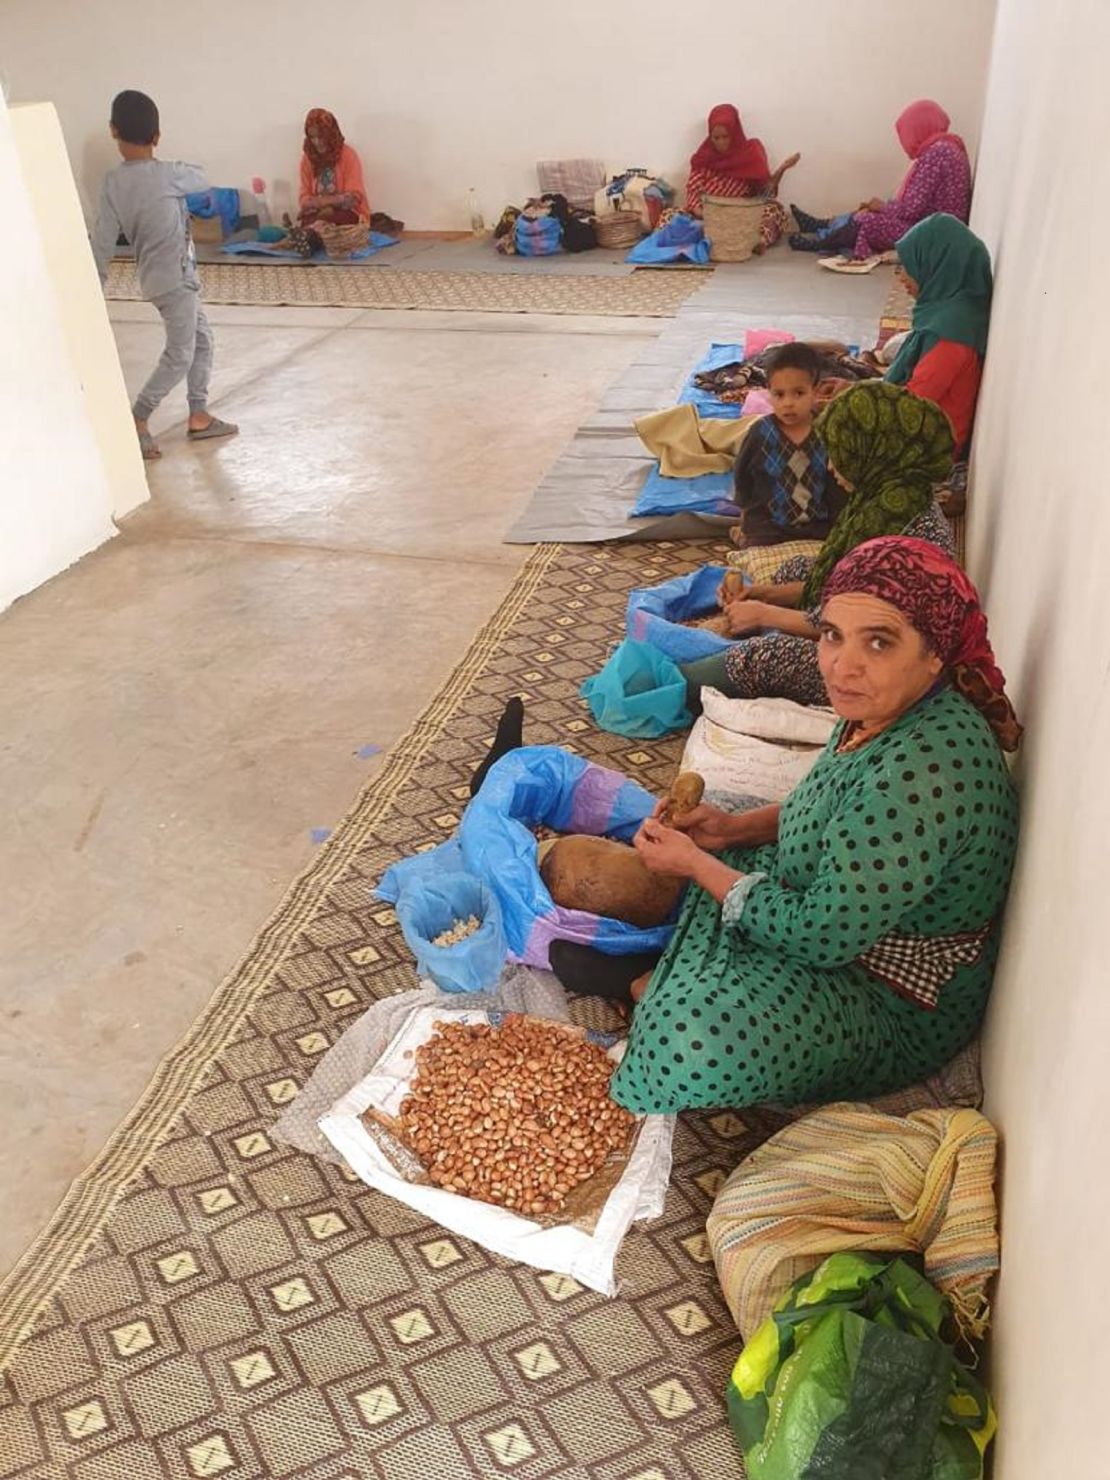 A woman crushing argan oil from the argan tree kernel using traditional methods at the  workshop.